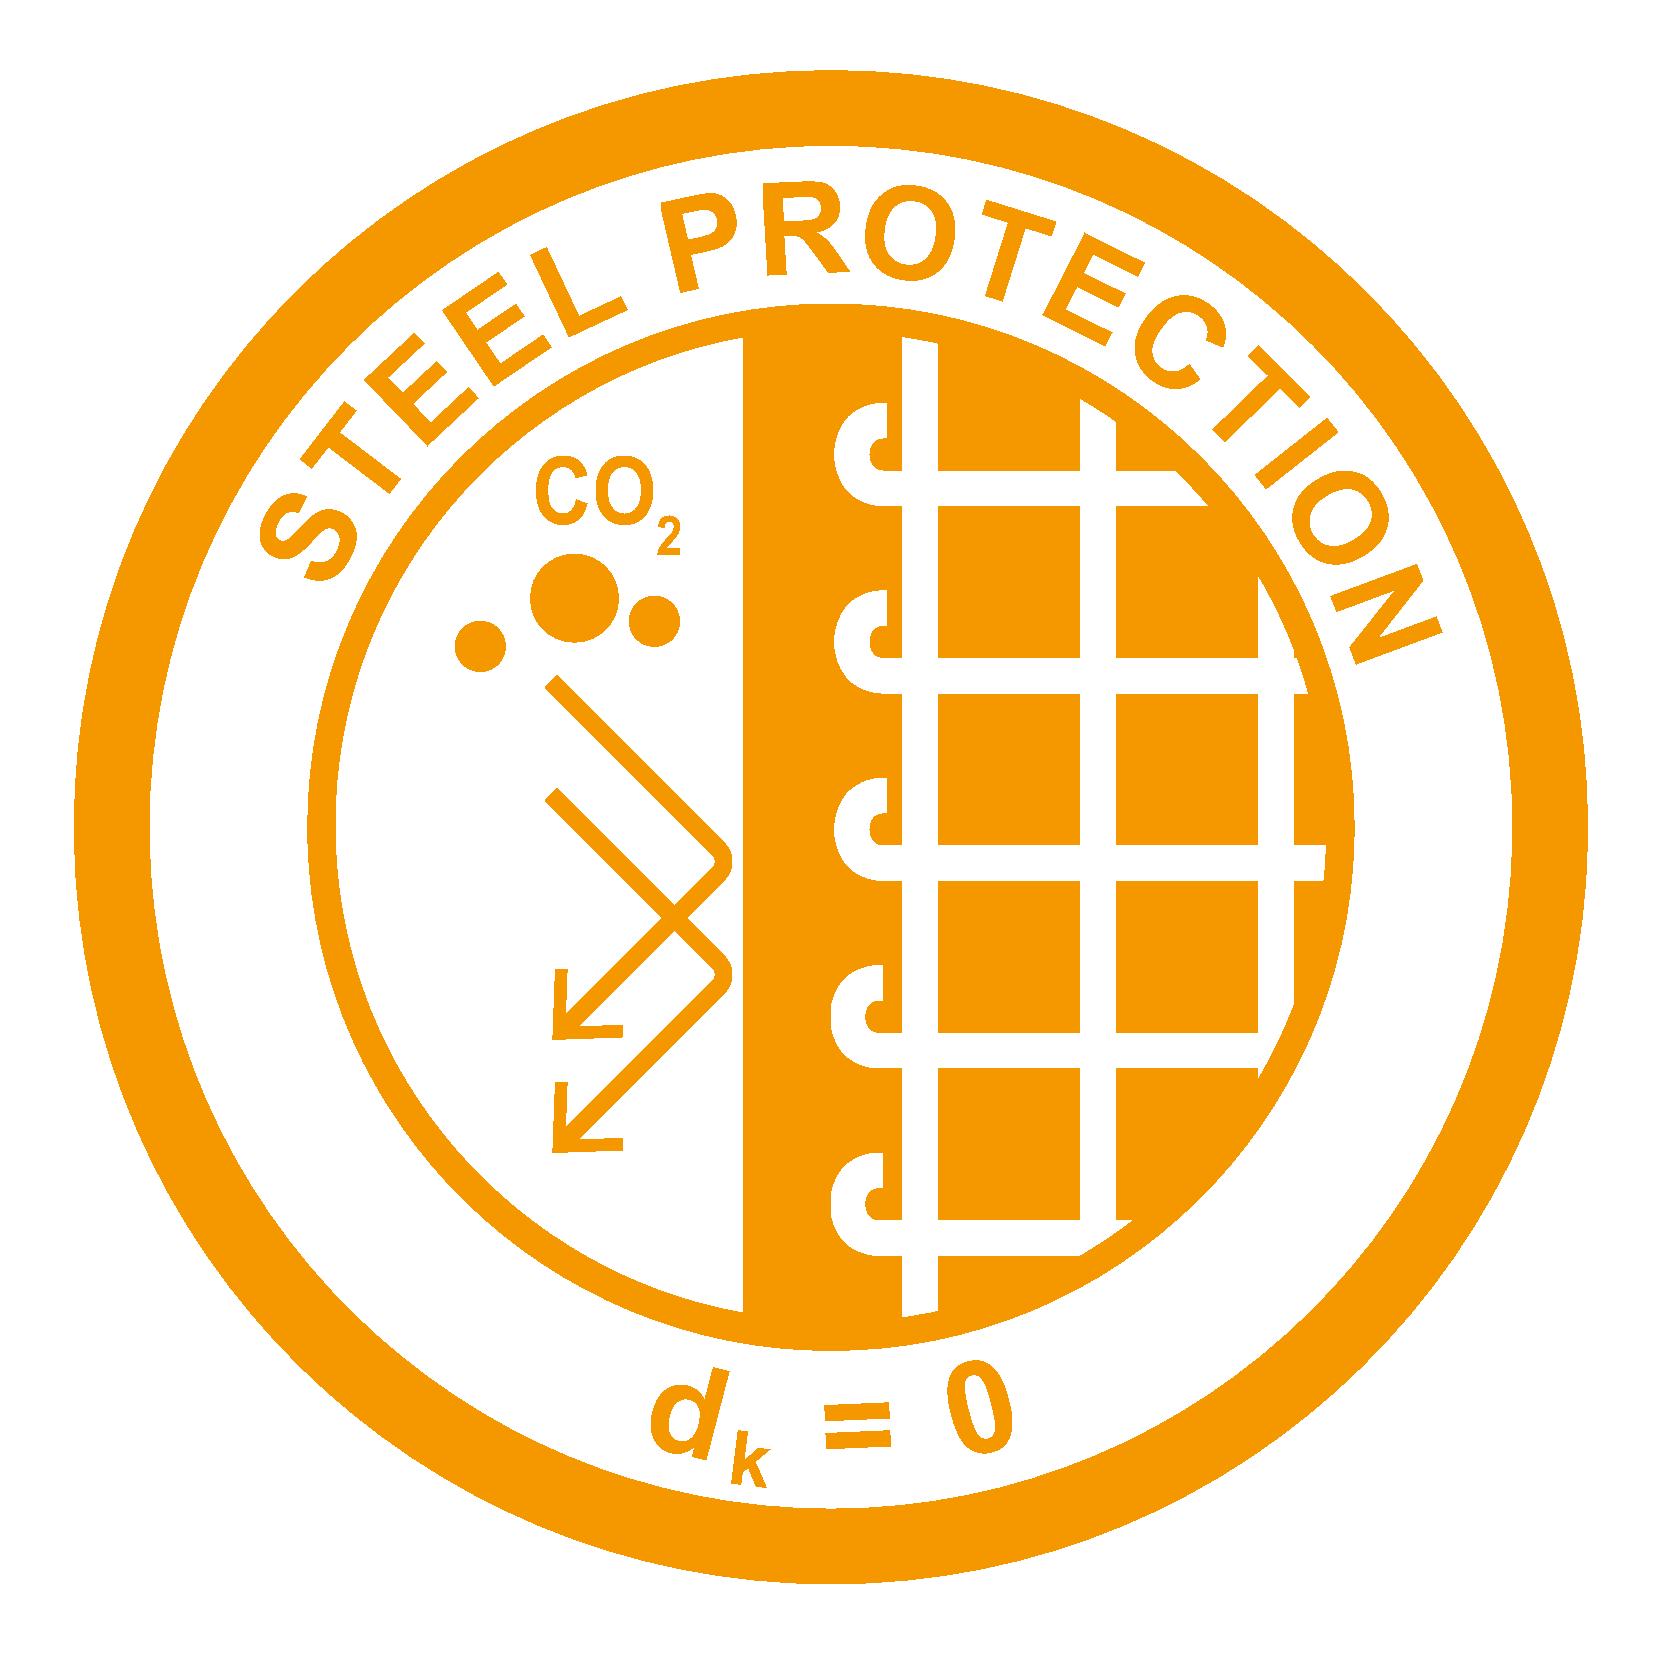 Steel Protection